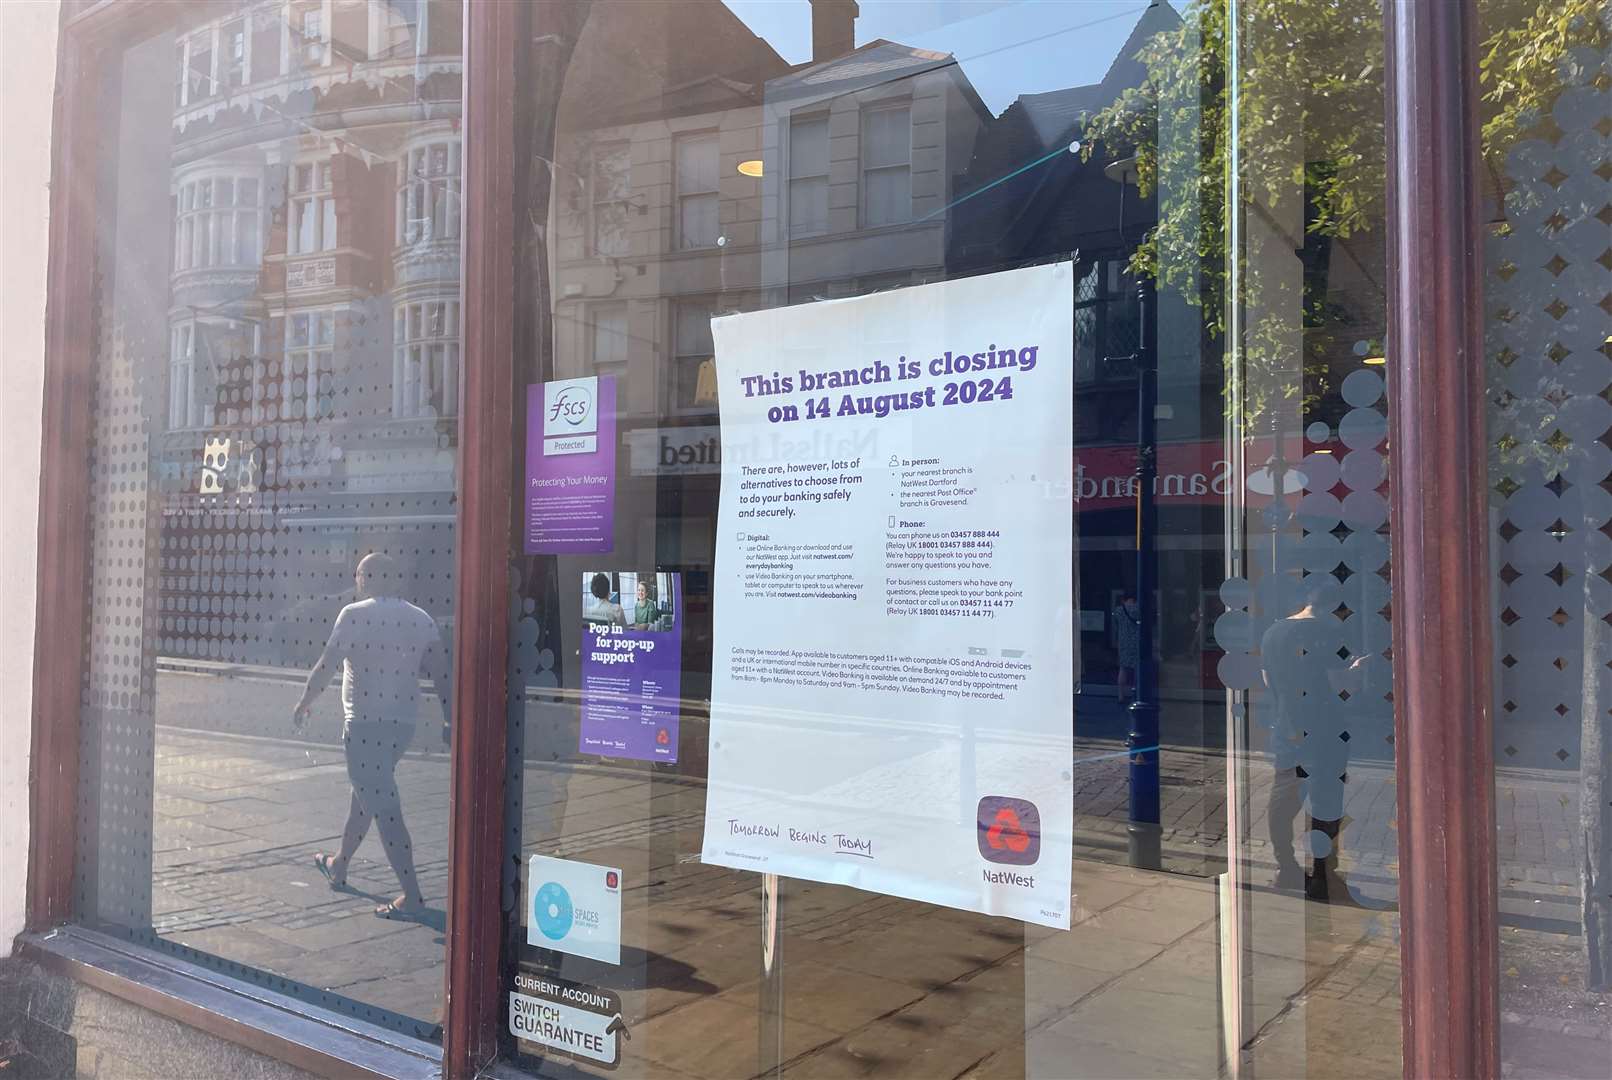 Natwest is closing its Gravesend branch on August 14